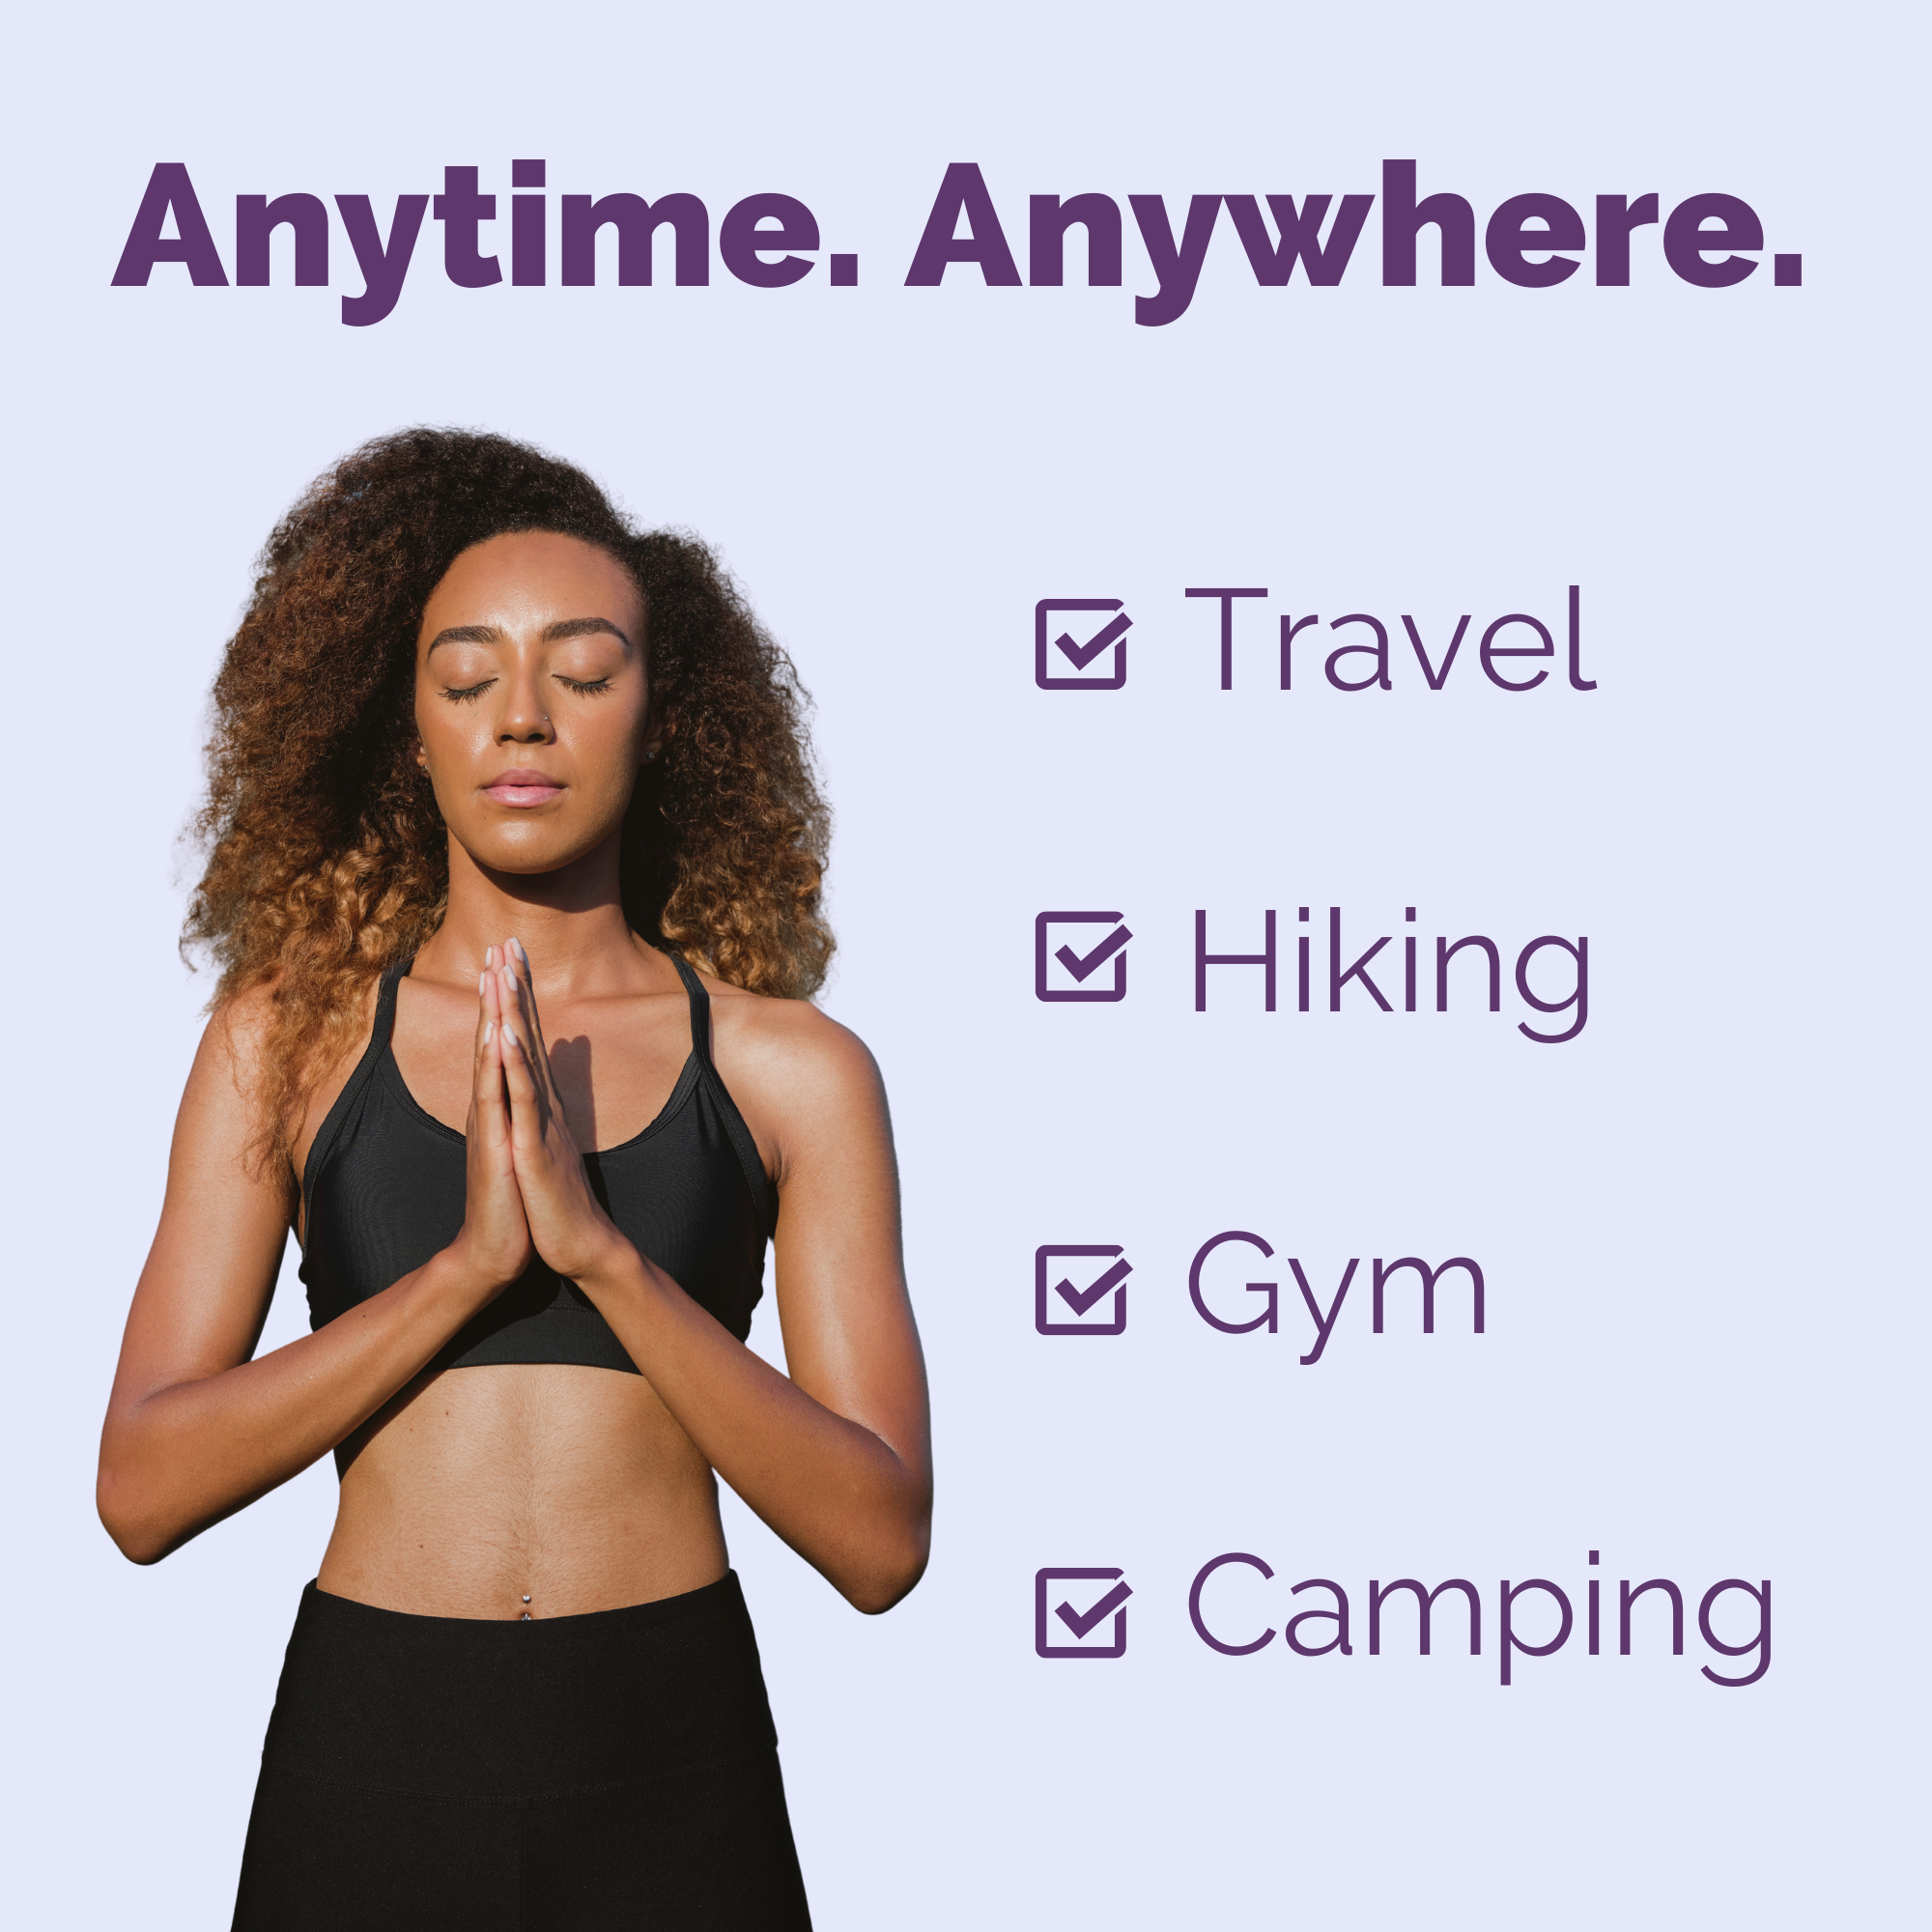 HyperGo Full Body Wipes for Travel, Hiking, Gym, and Camping.